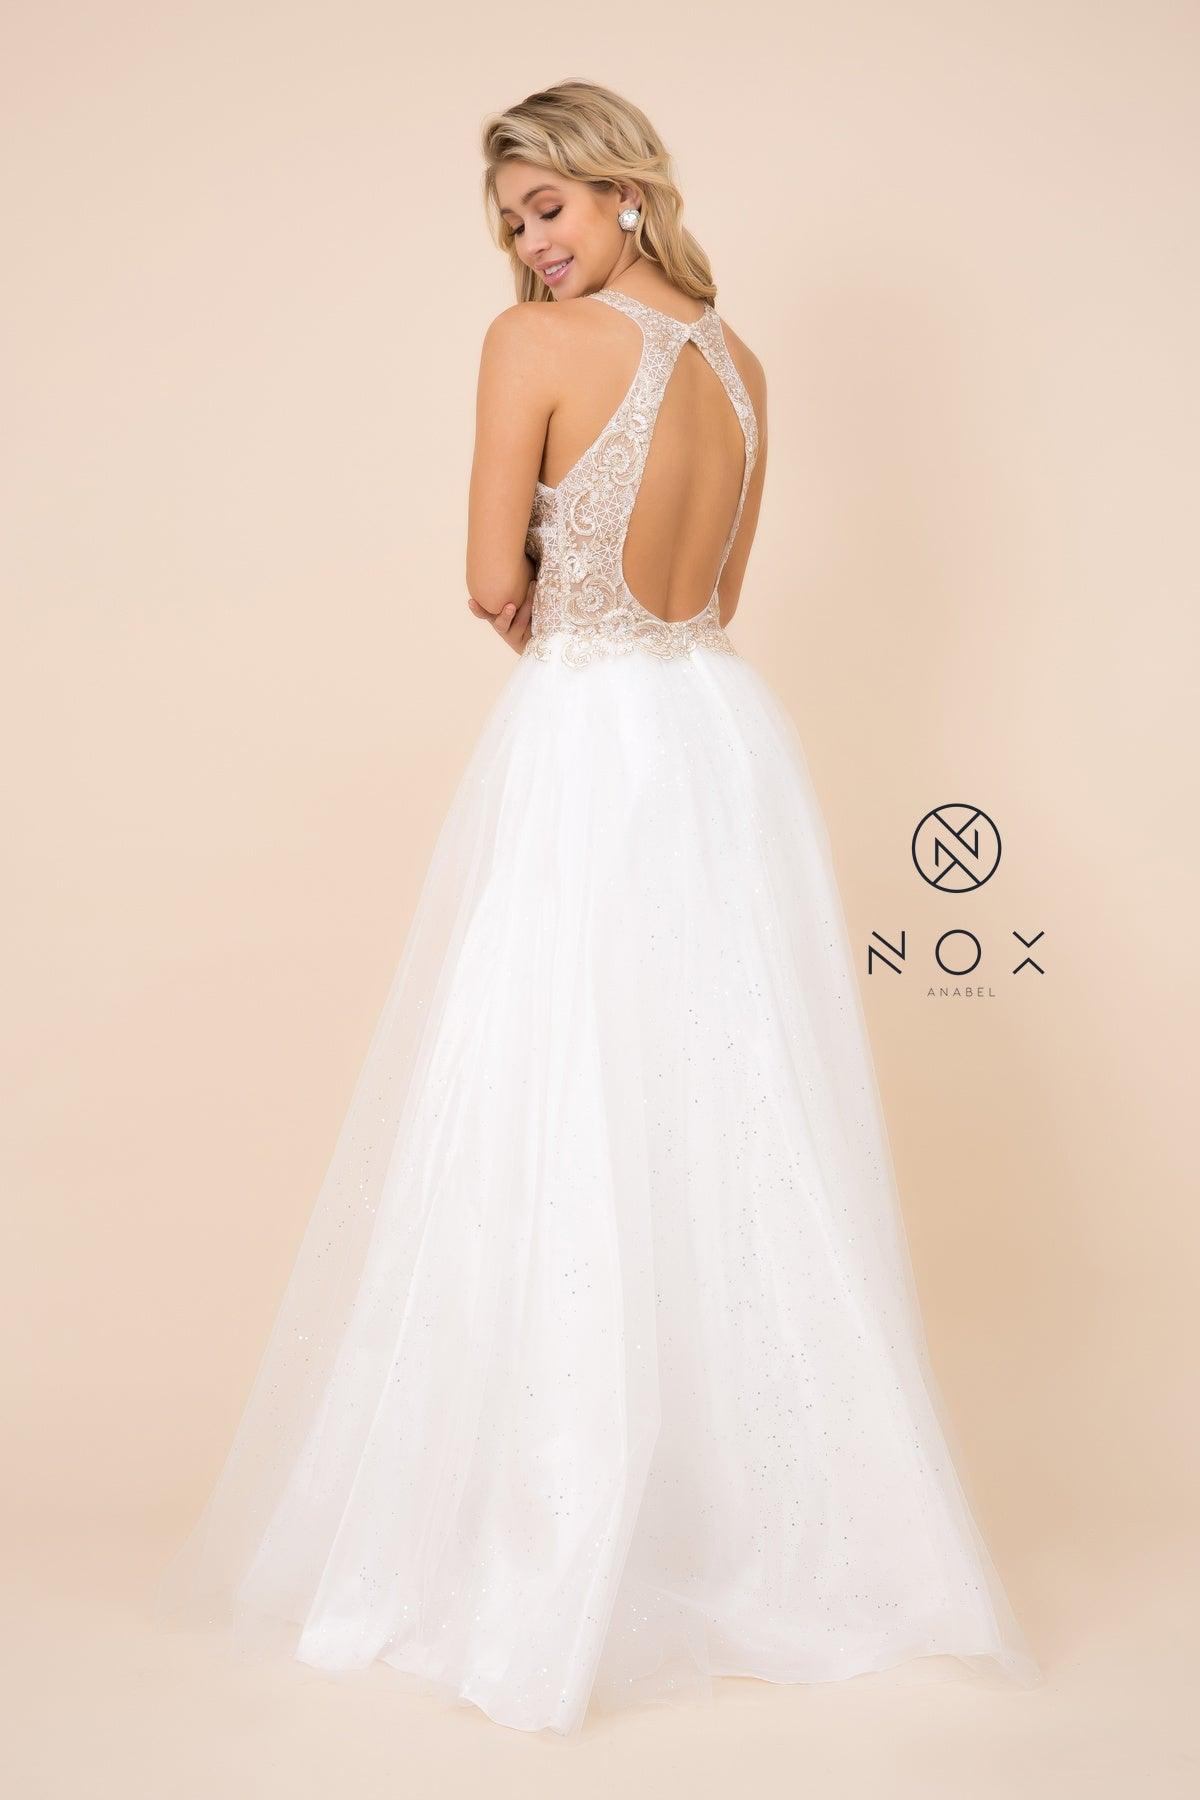 Long Wedding Dress White Gold - The Dress Outlet Nox Anabel